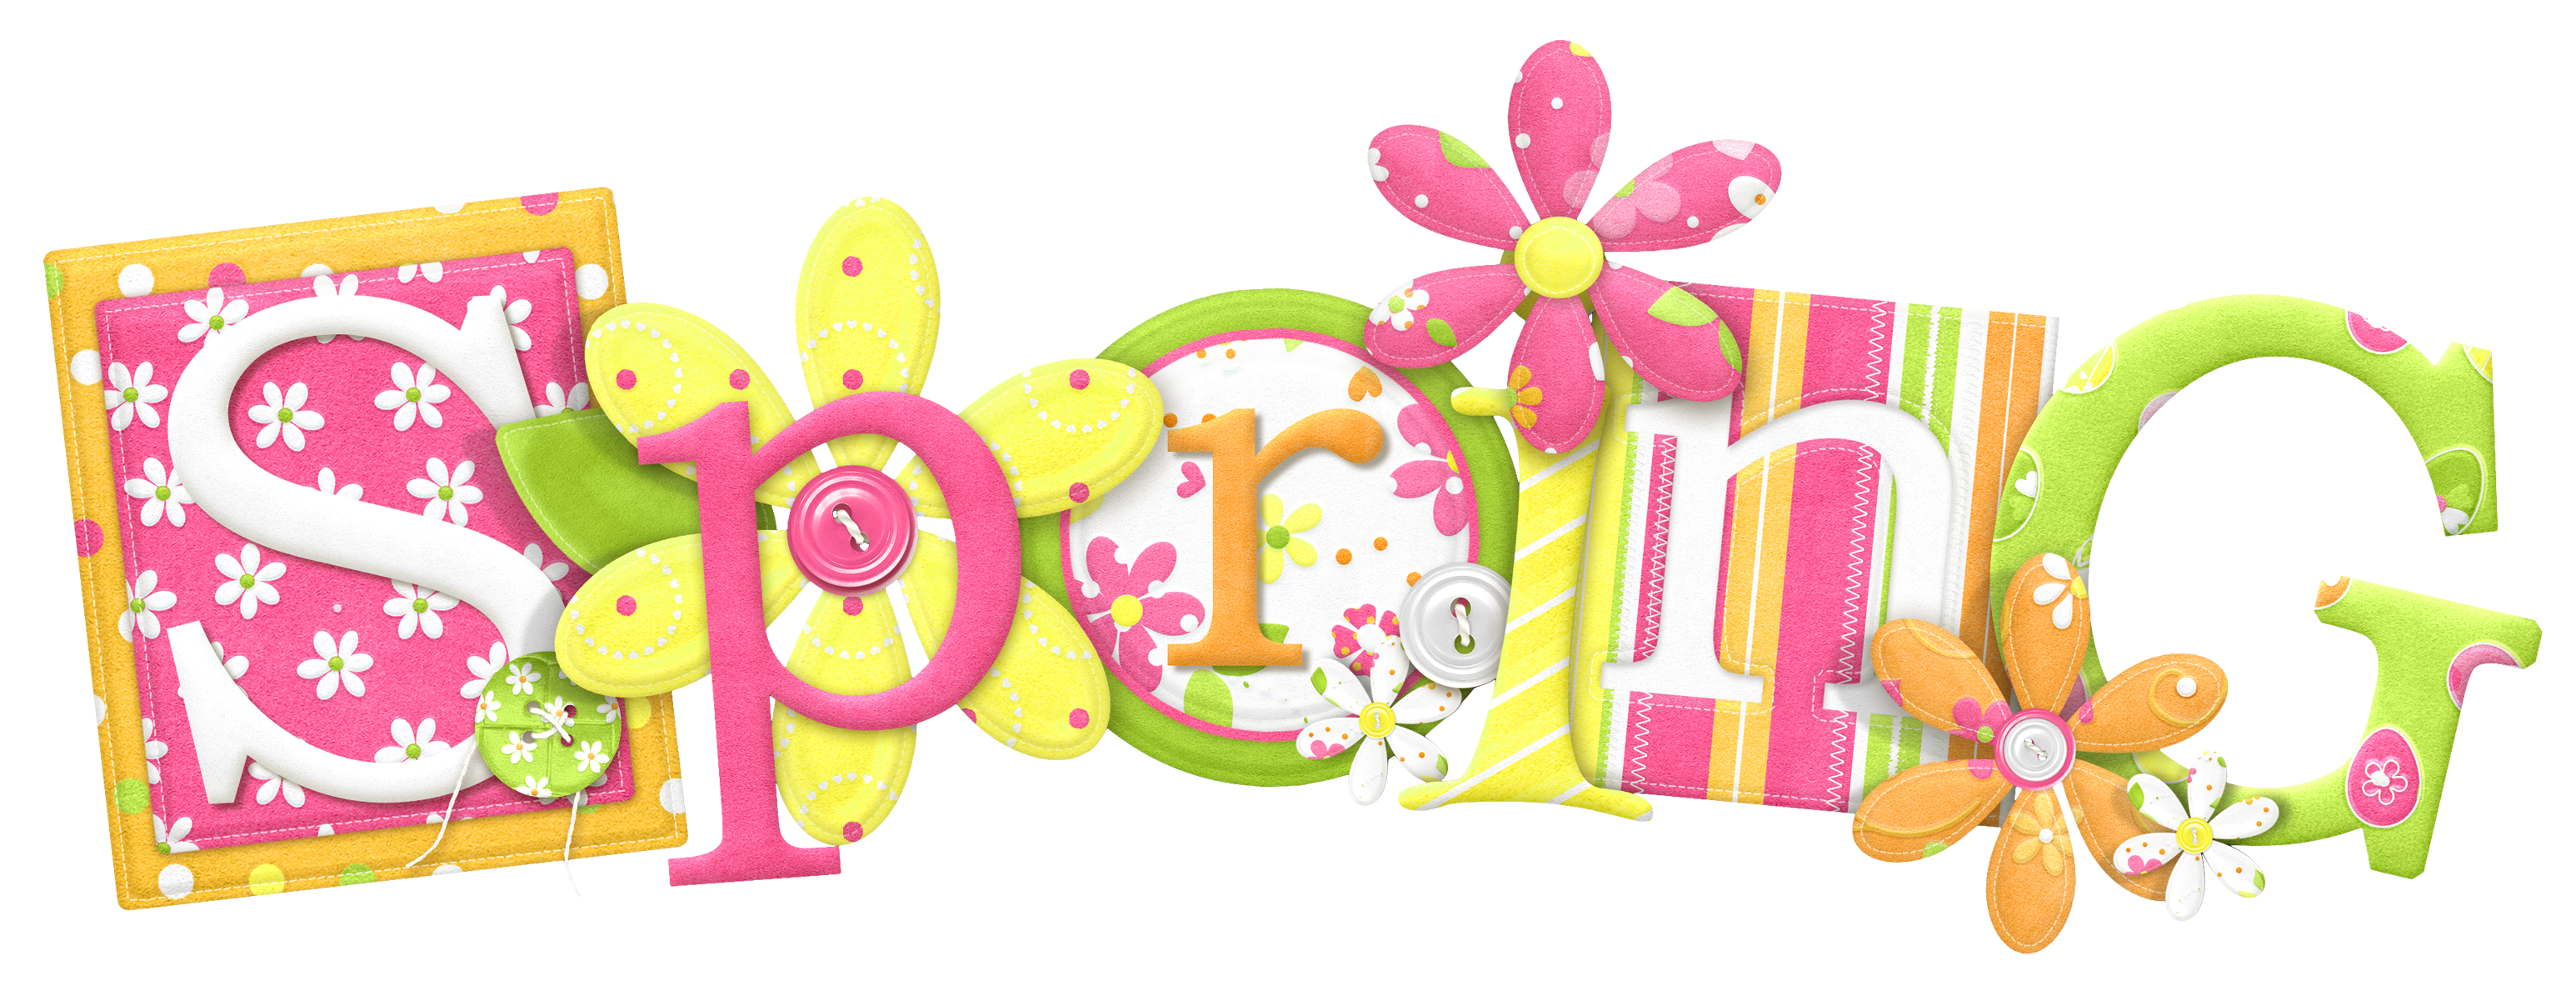 Spring clip art free clipart  - Spring Free Clipart